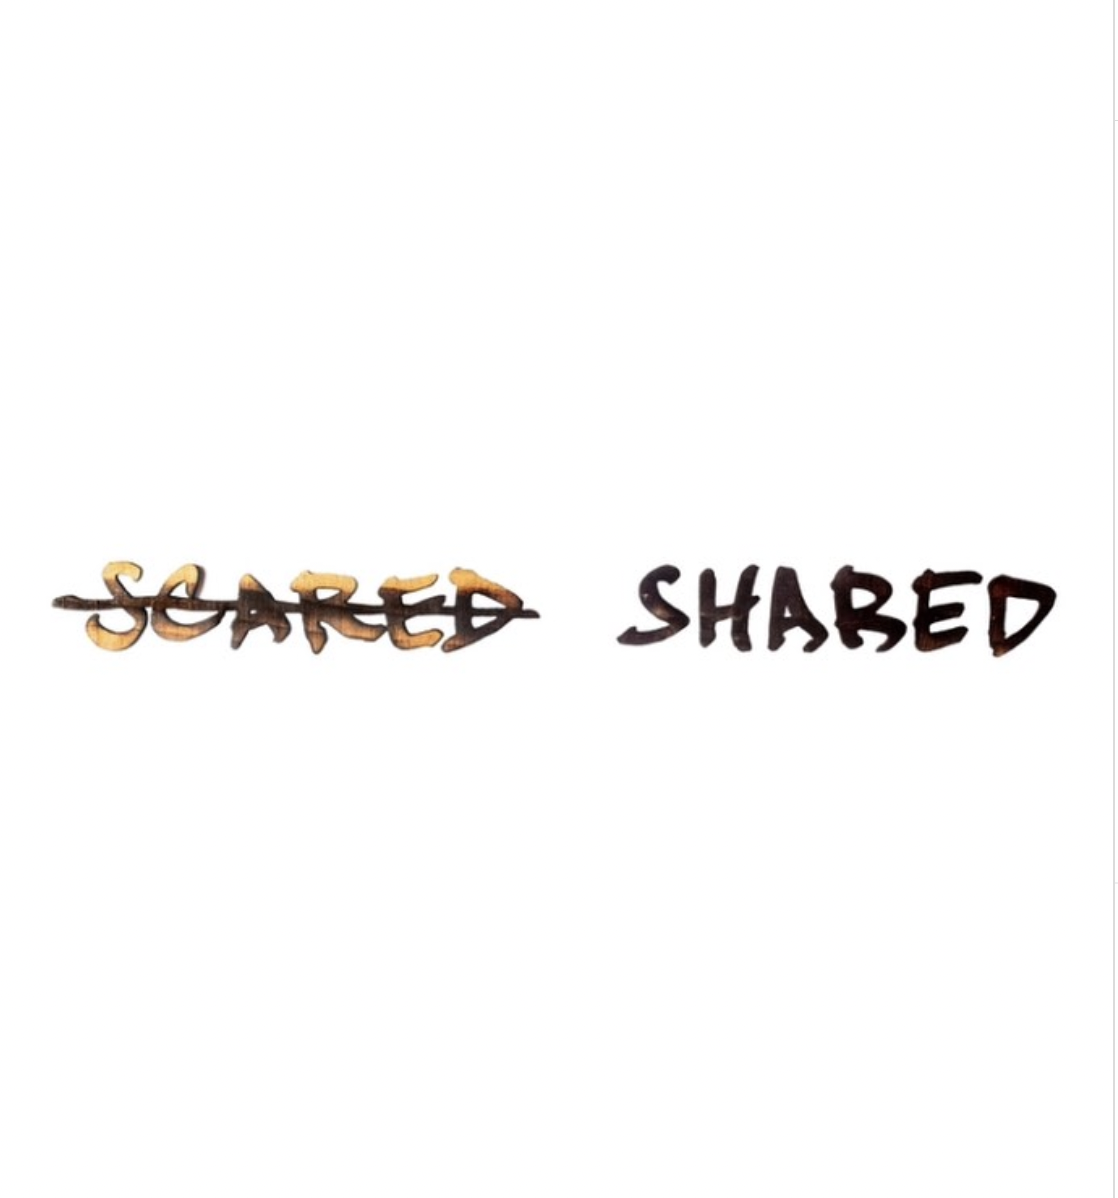 SCARED SHARED, 2023, FROM THE MALAPROPISMS SERIES, SCANNED HANDWRITING, LASER-CUT AND CHARRED CALIFORNIA LIVE OAK